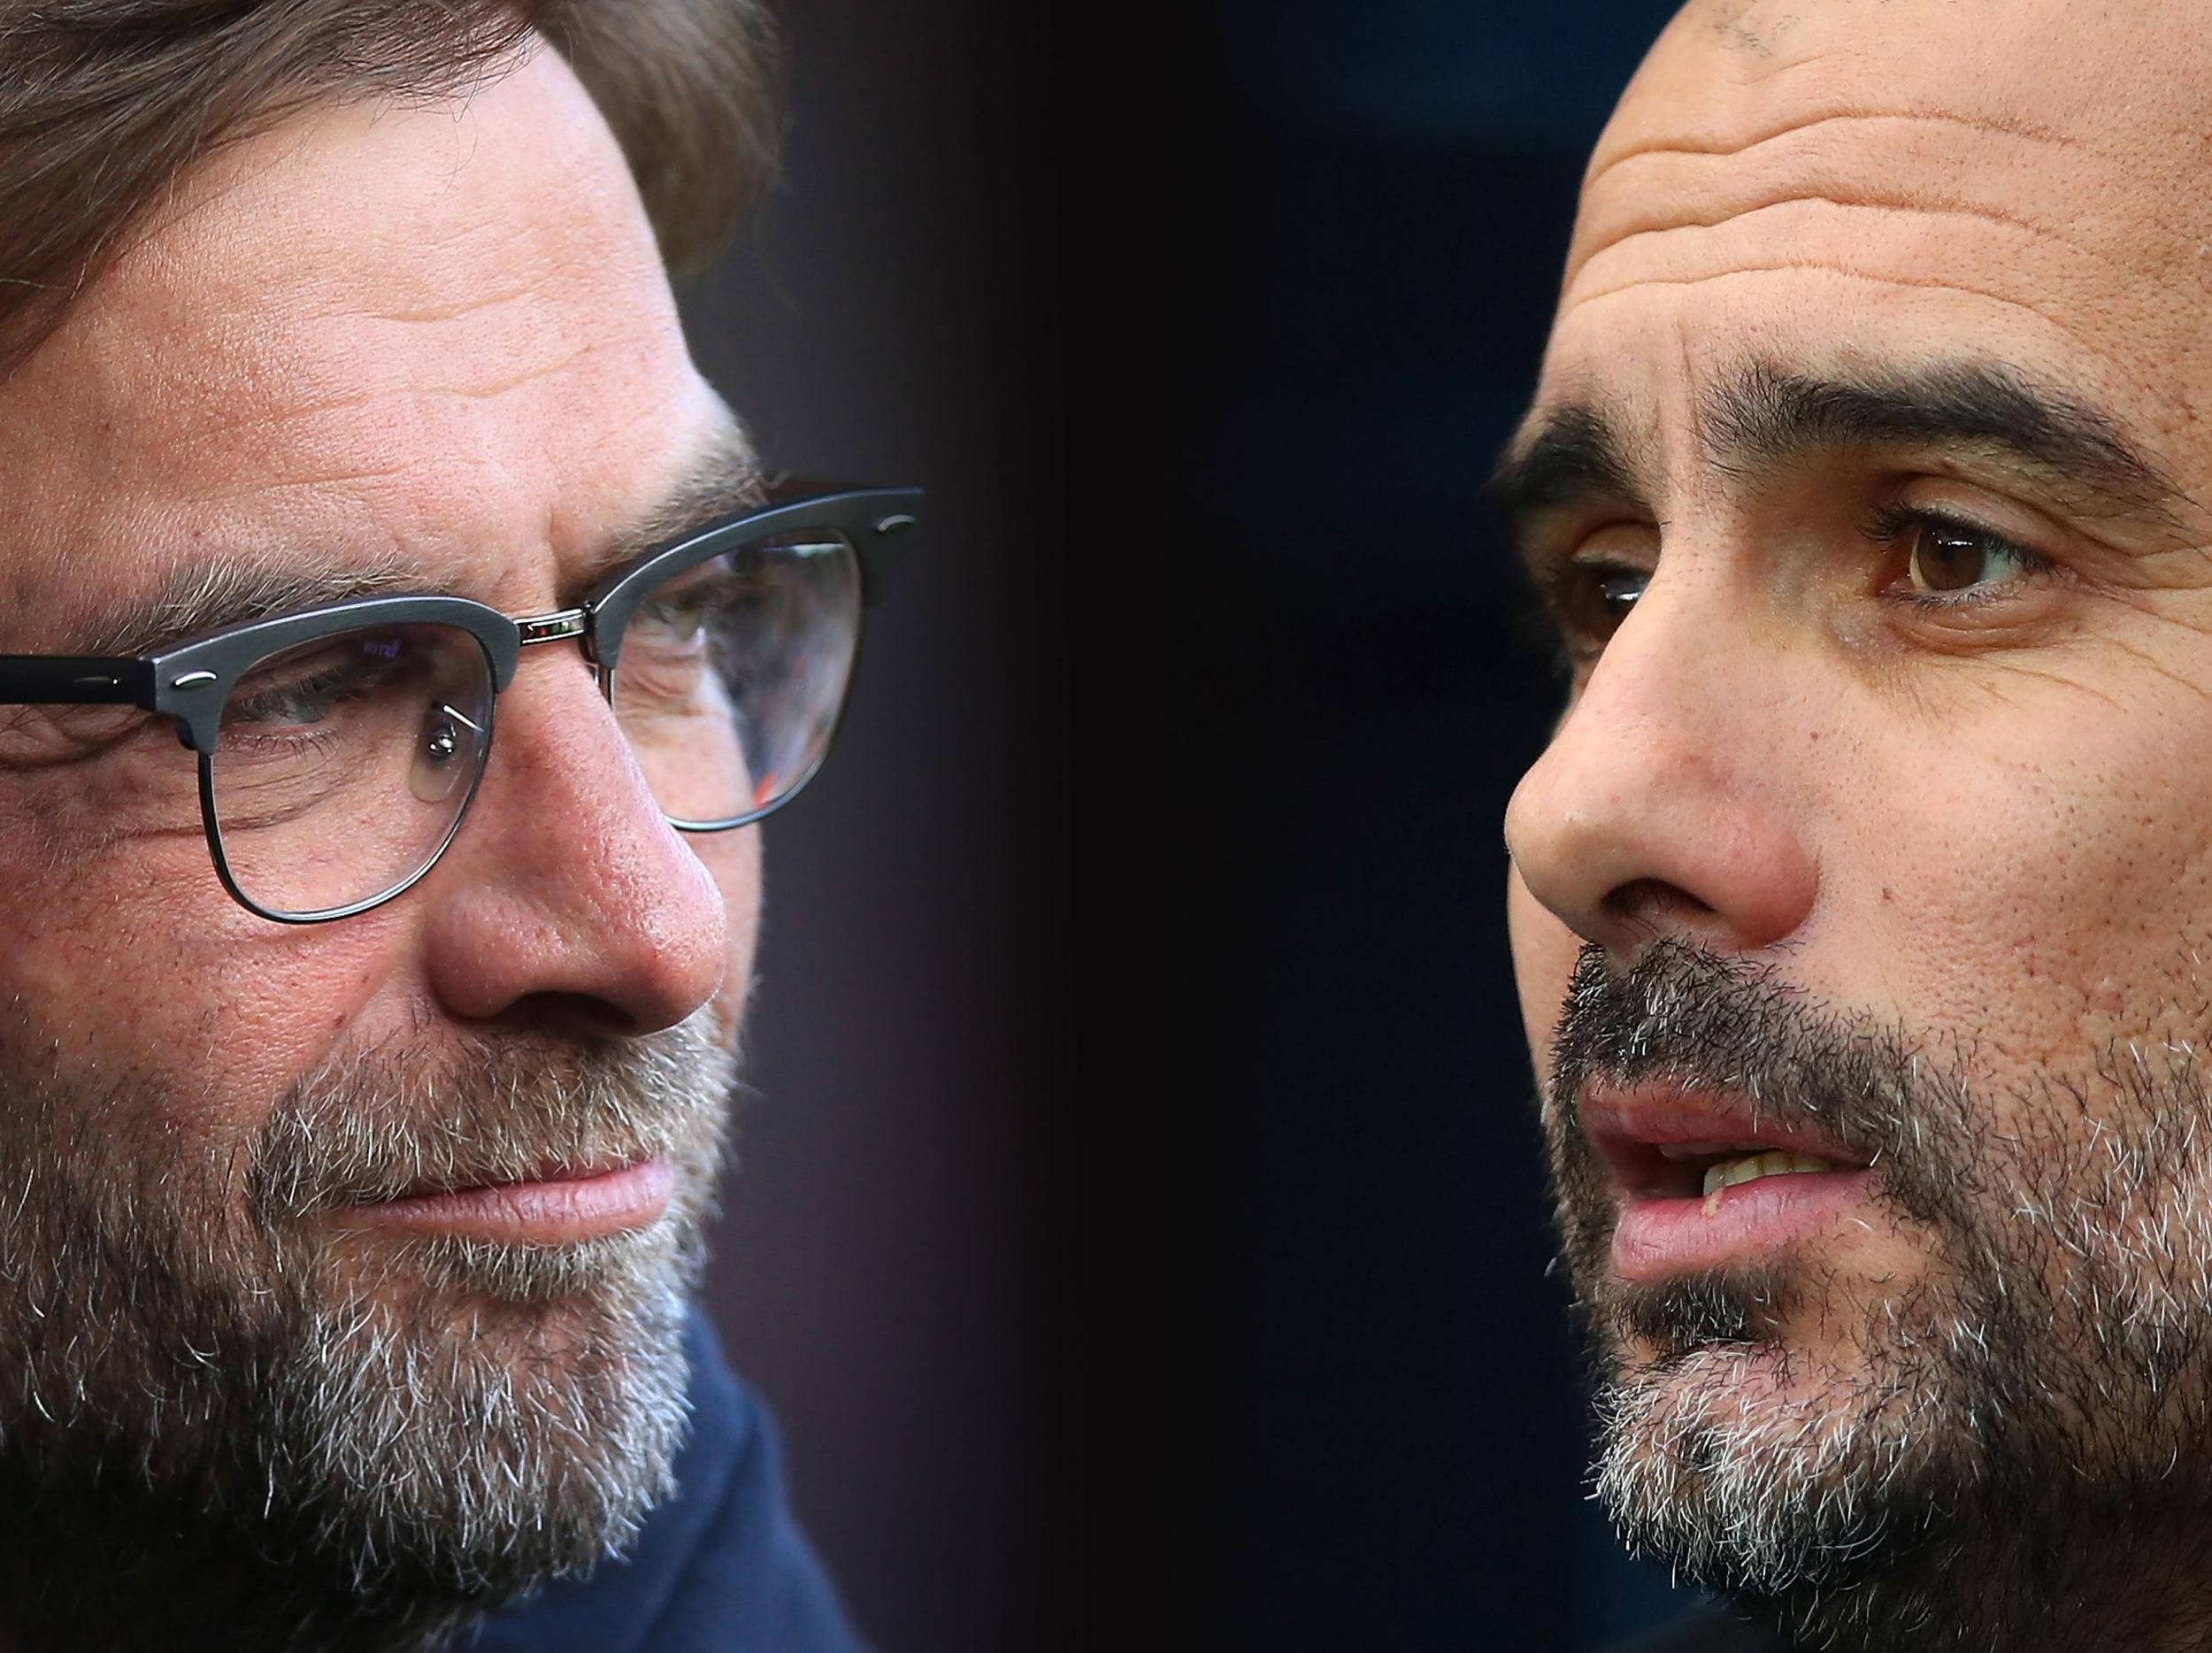 Jurgen Klopp's side should have all the motivation they need against Manchester City